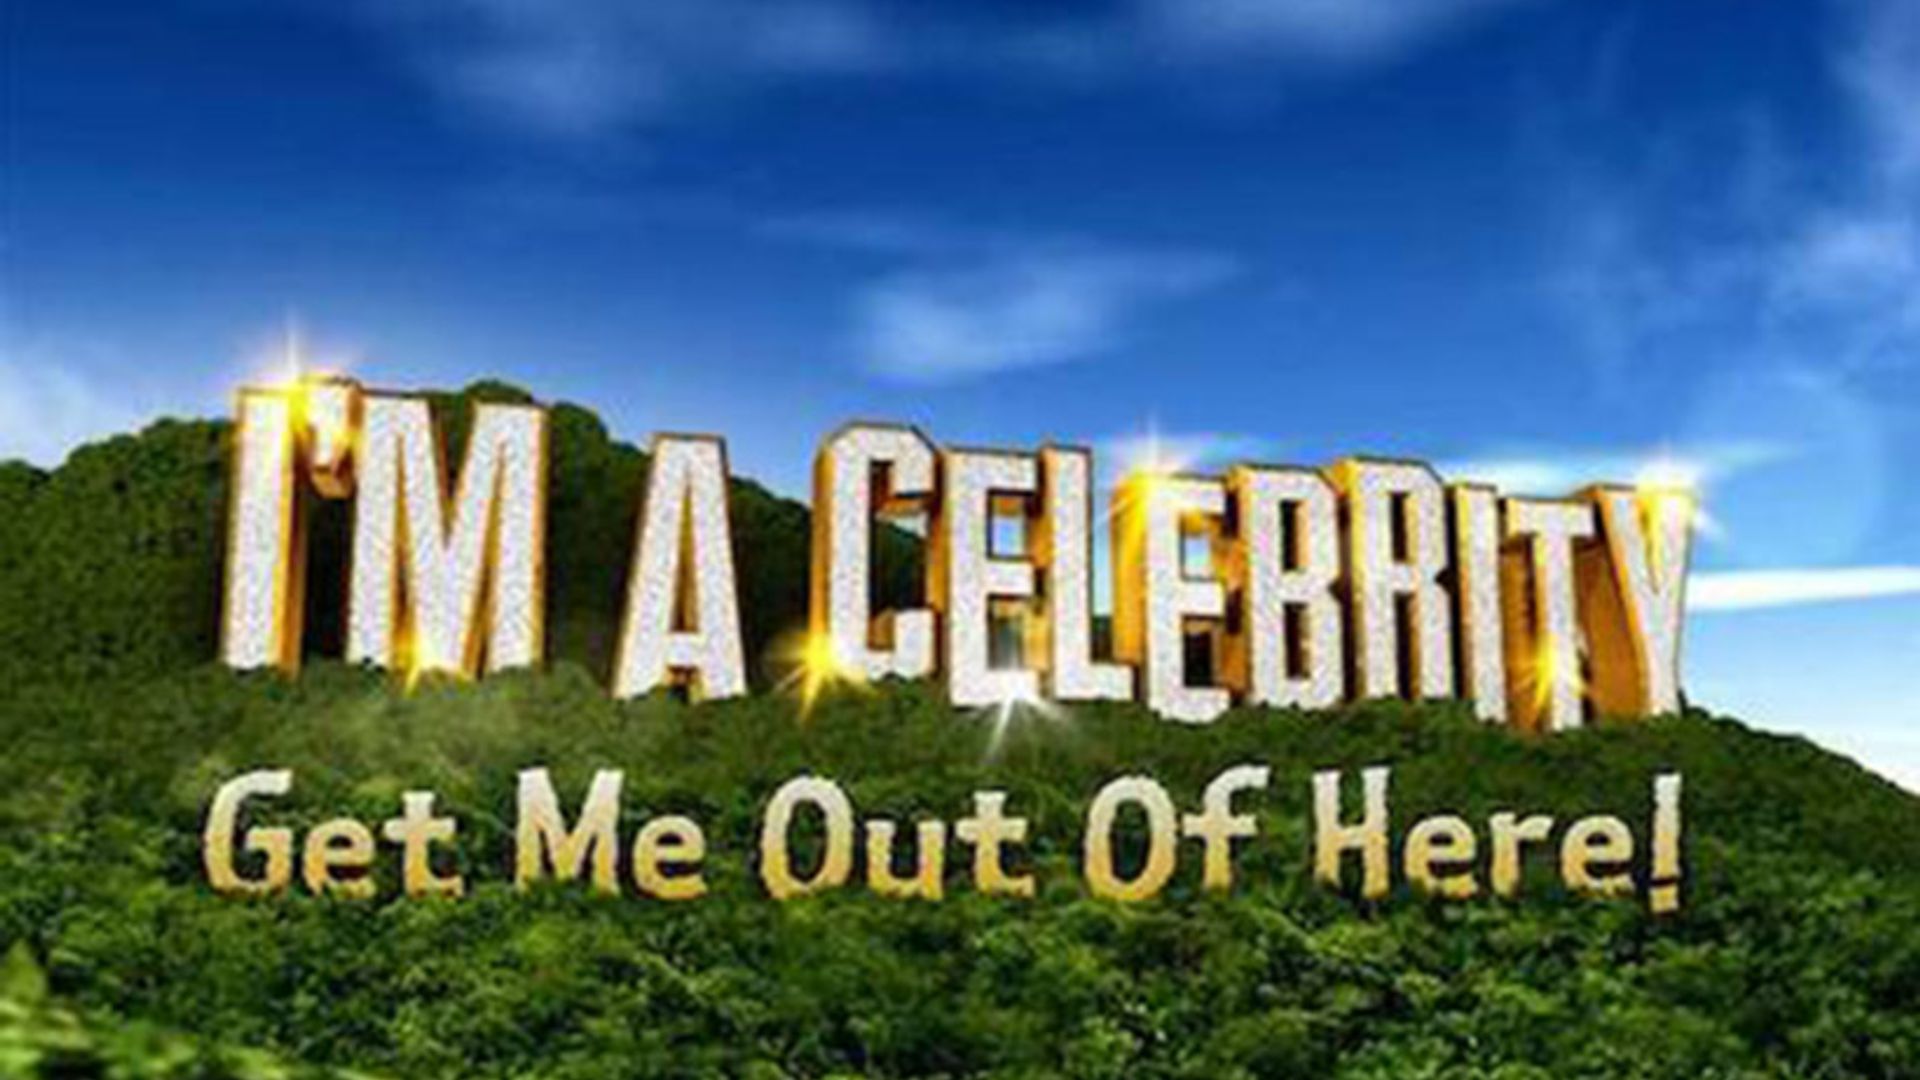 I'm a Celebrity lands new host! ITV confirm Ant McPartlin will be replaced